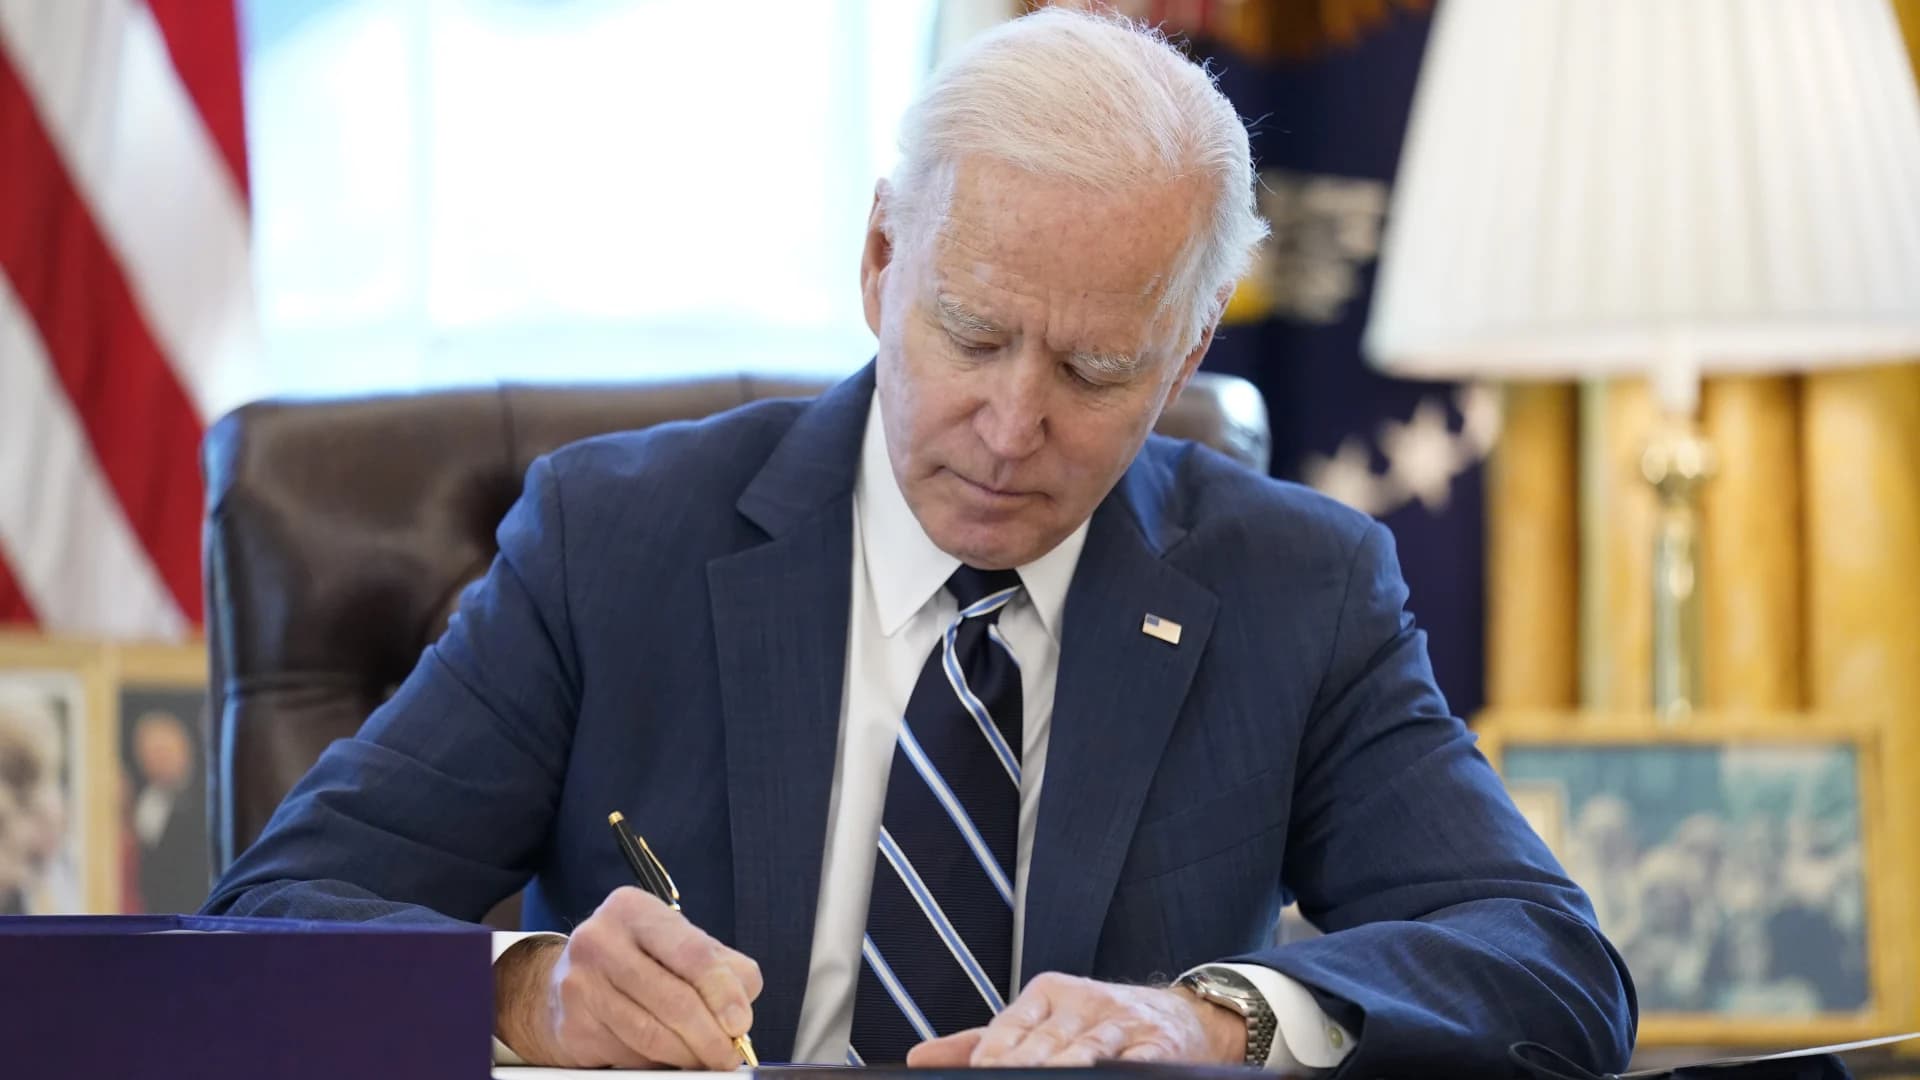 President Biden to send COVID shots to Mexico, Canada in first exports